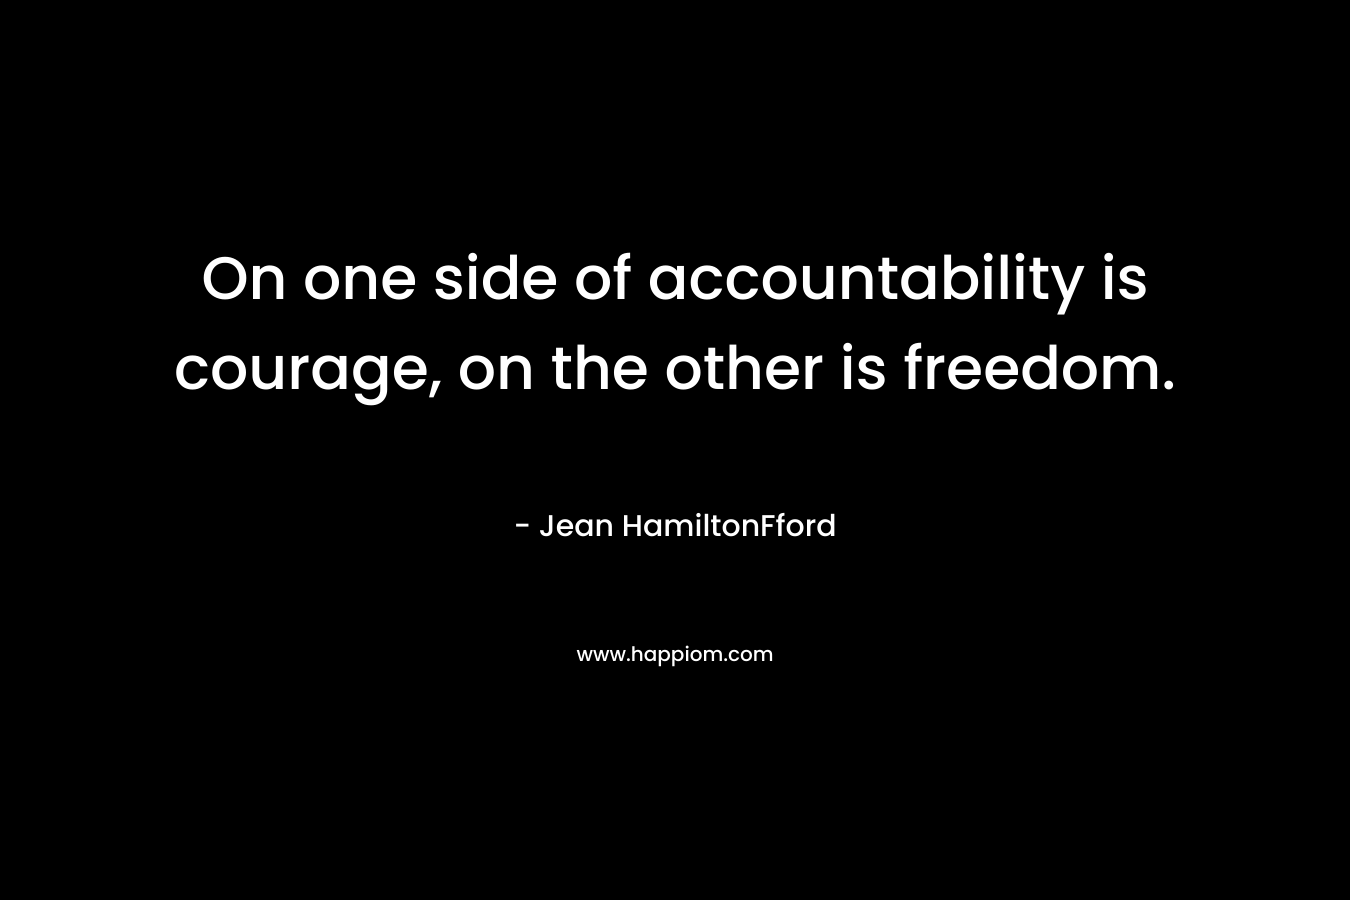 On one side of accountability is courage, on the other is freedom.